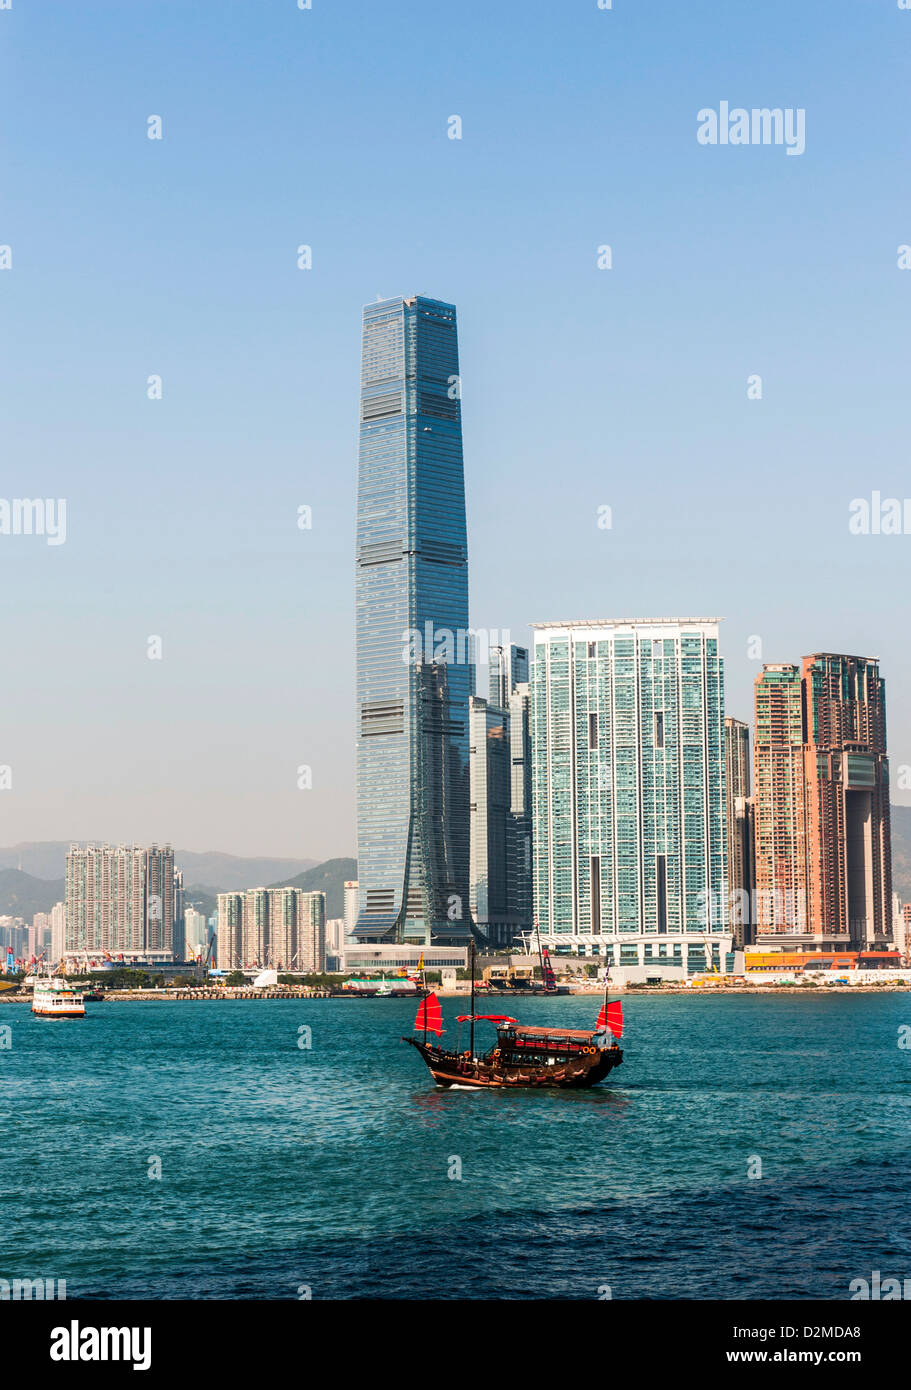 International Commerce Centre, Hong Kong and old boat in the harbour Stock Photo